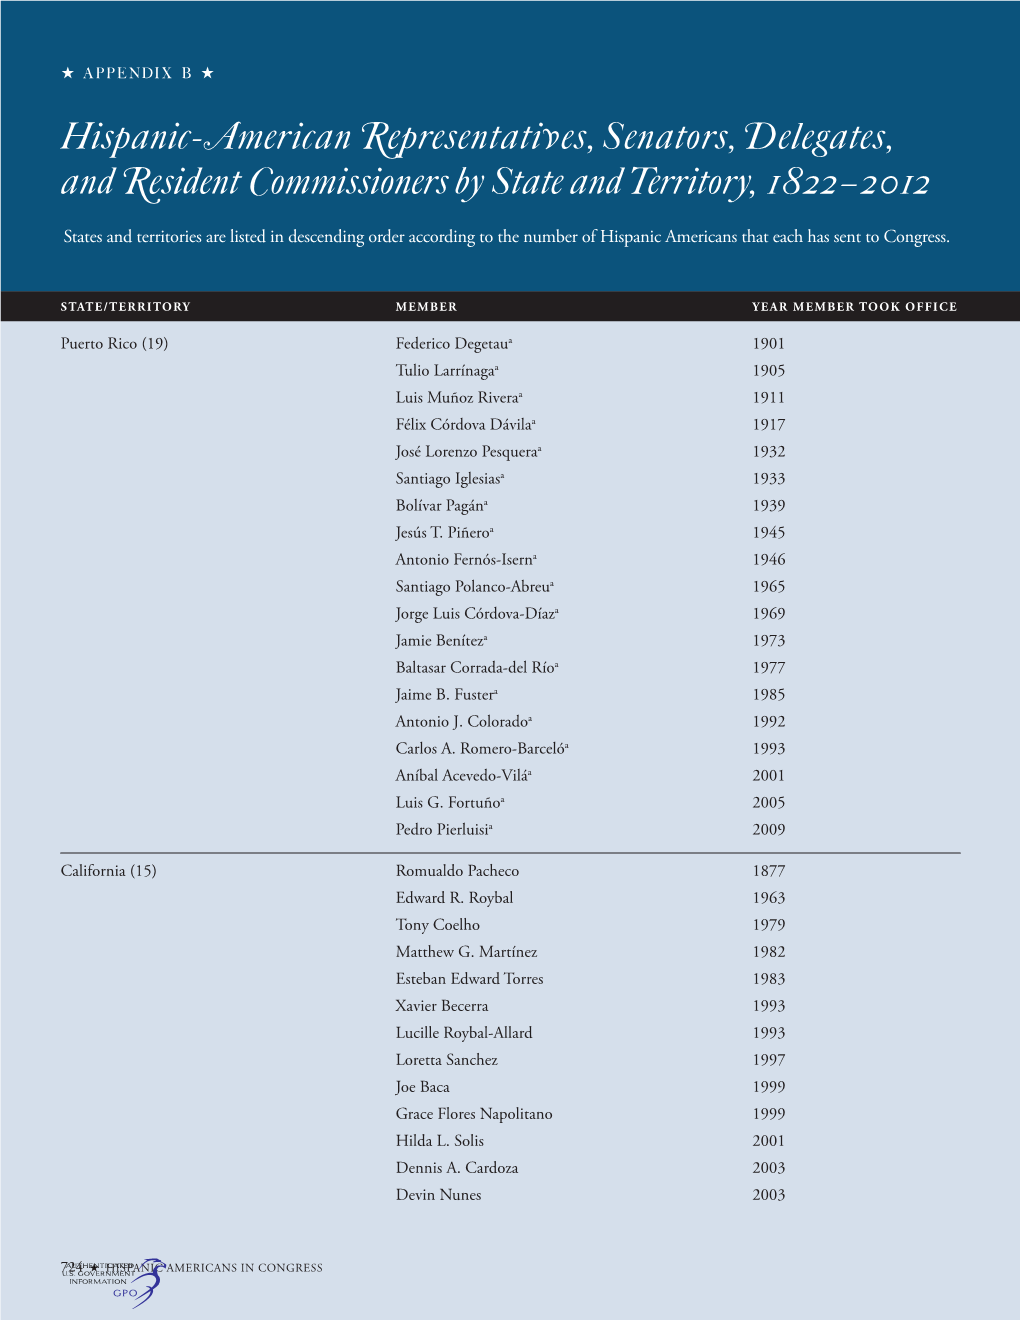 Hispanic-American Representatives, Senators, Delegates, and Resident Commissioners by State and Territory, 1822–2012